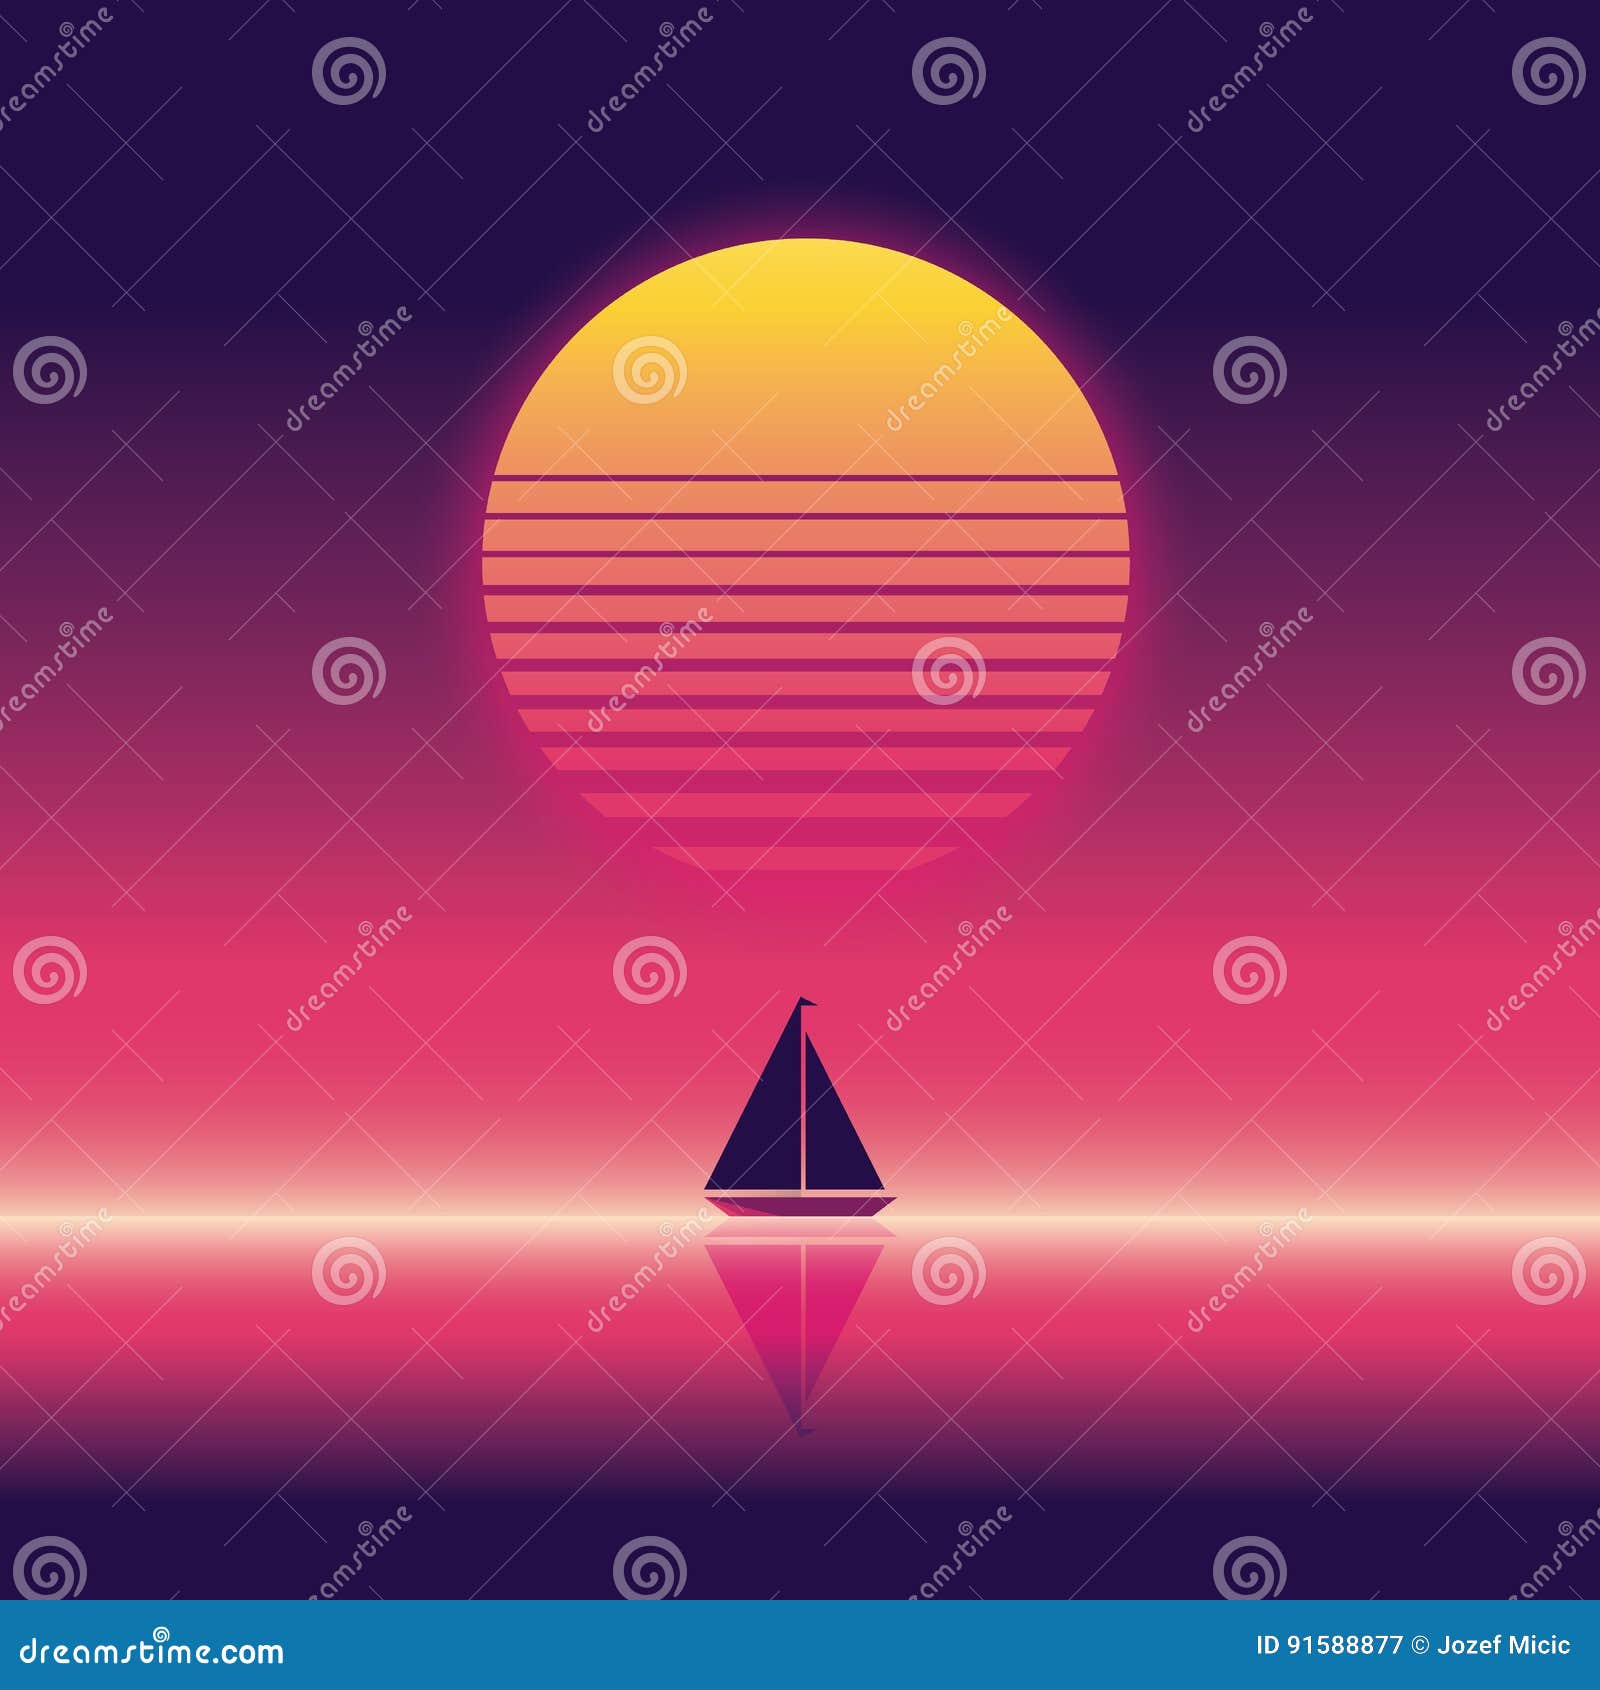 summer beach party  banner or flyer template. 80s retro neon glow style. yacht sailing on horizon.